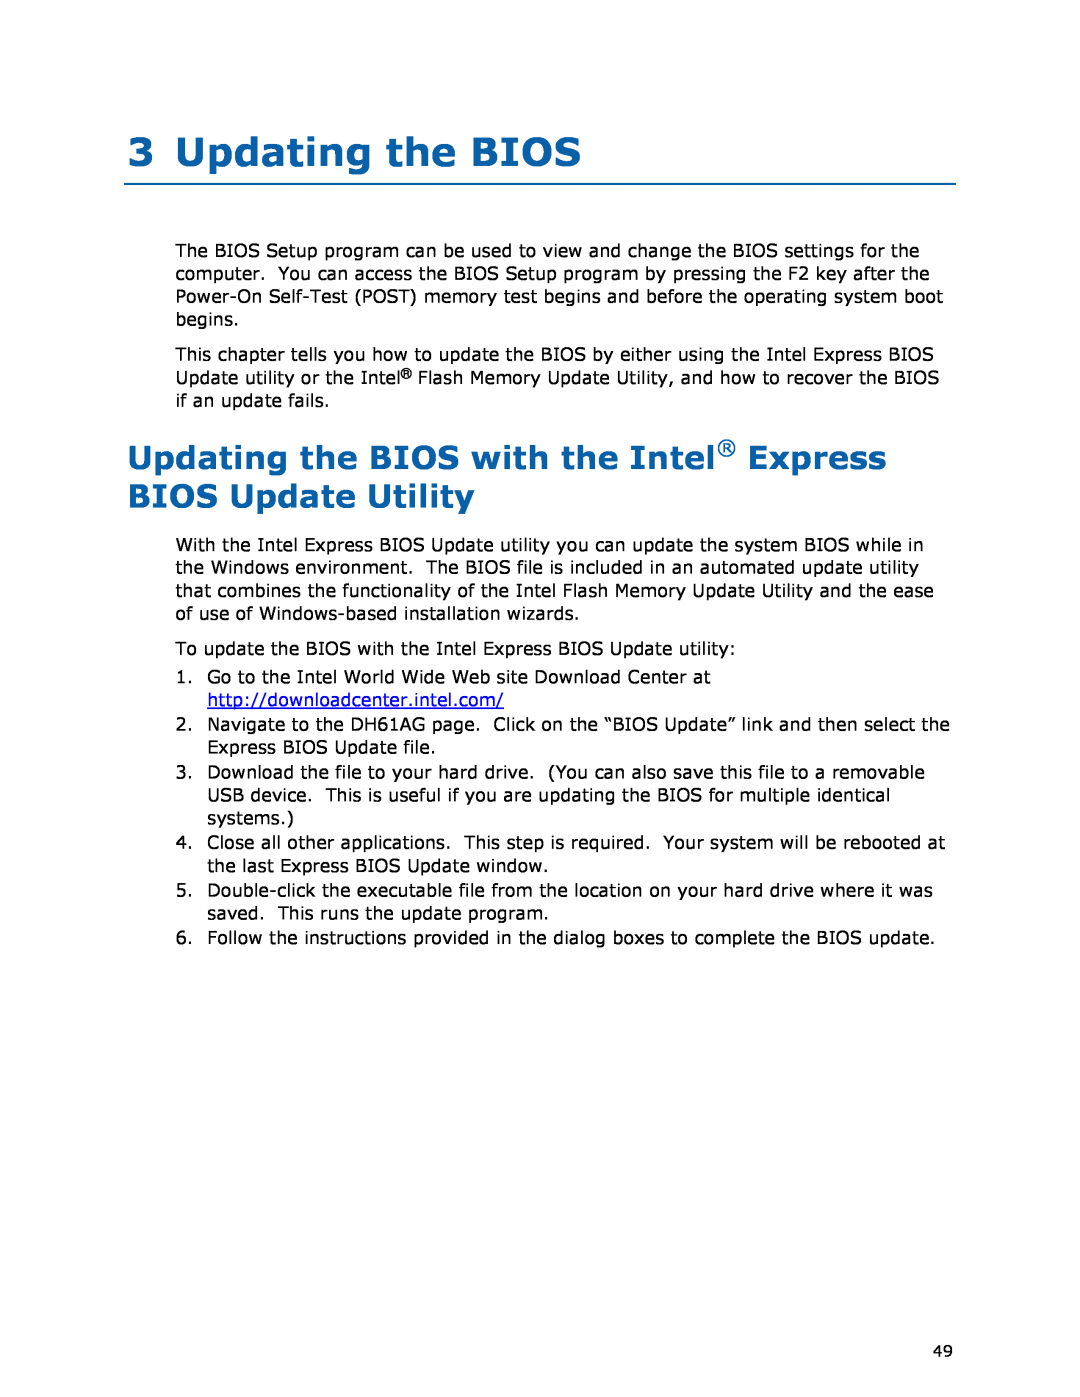 Intel BOXDH61AG manual Updating the BIOS with the Intel Express BIOS Update Utility 